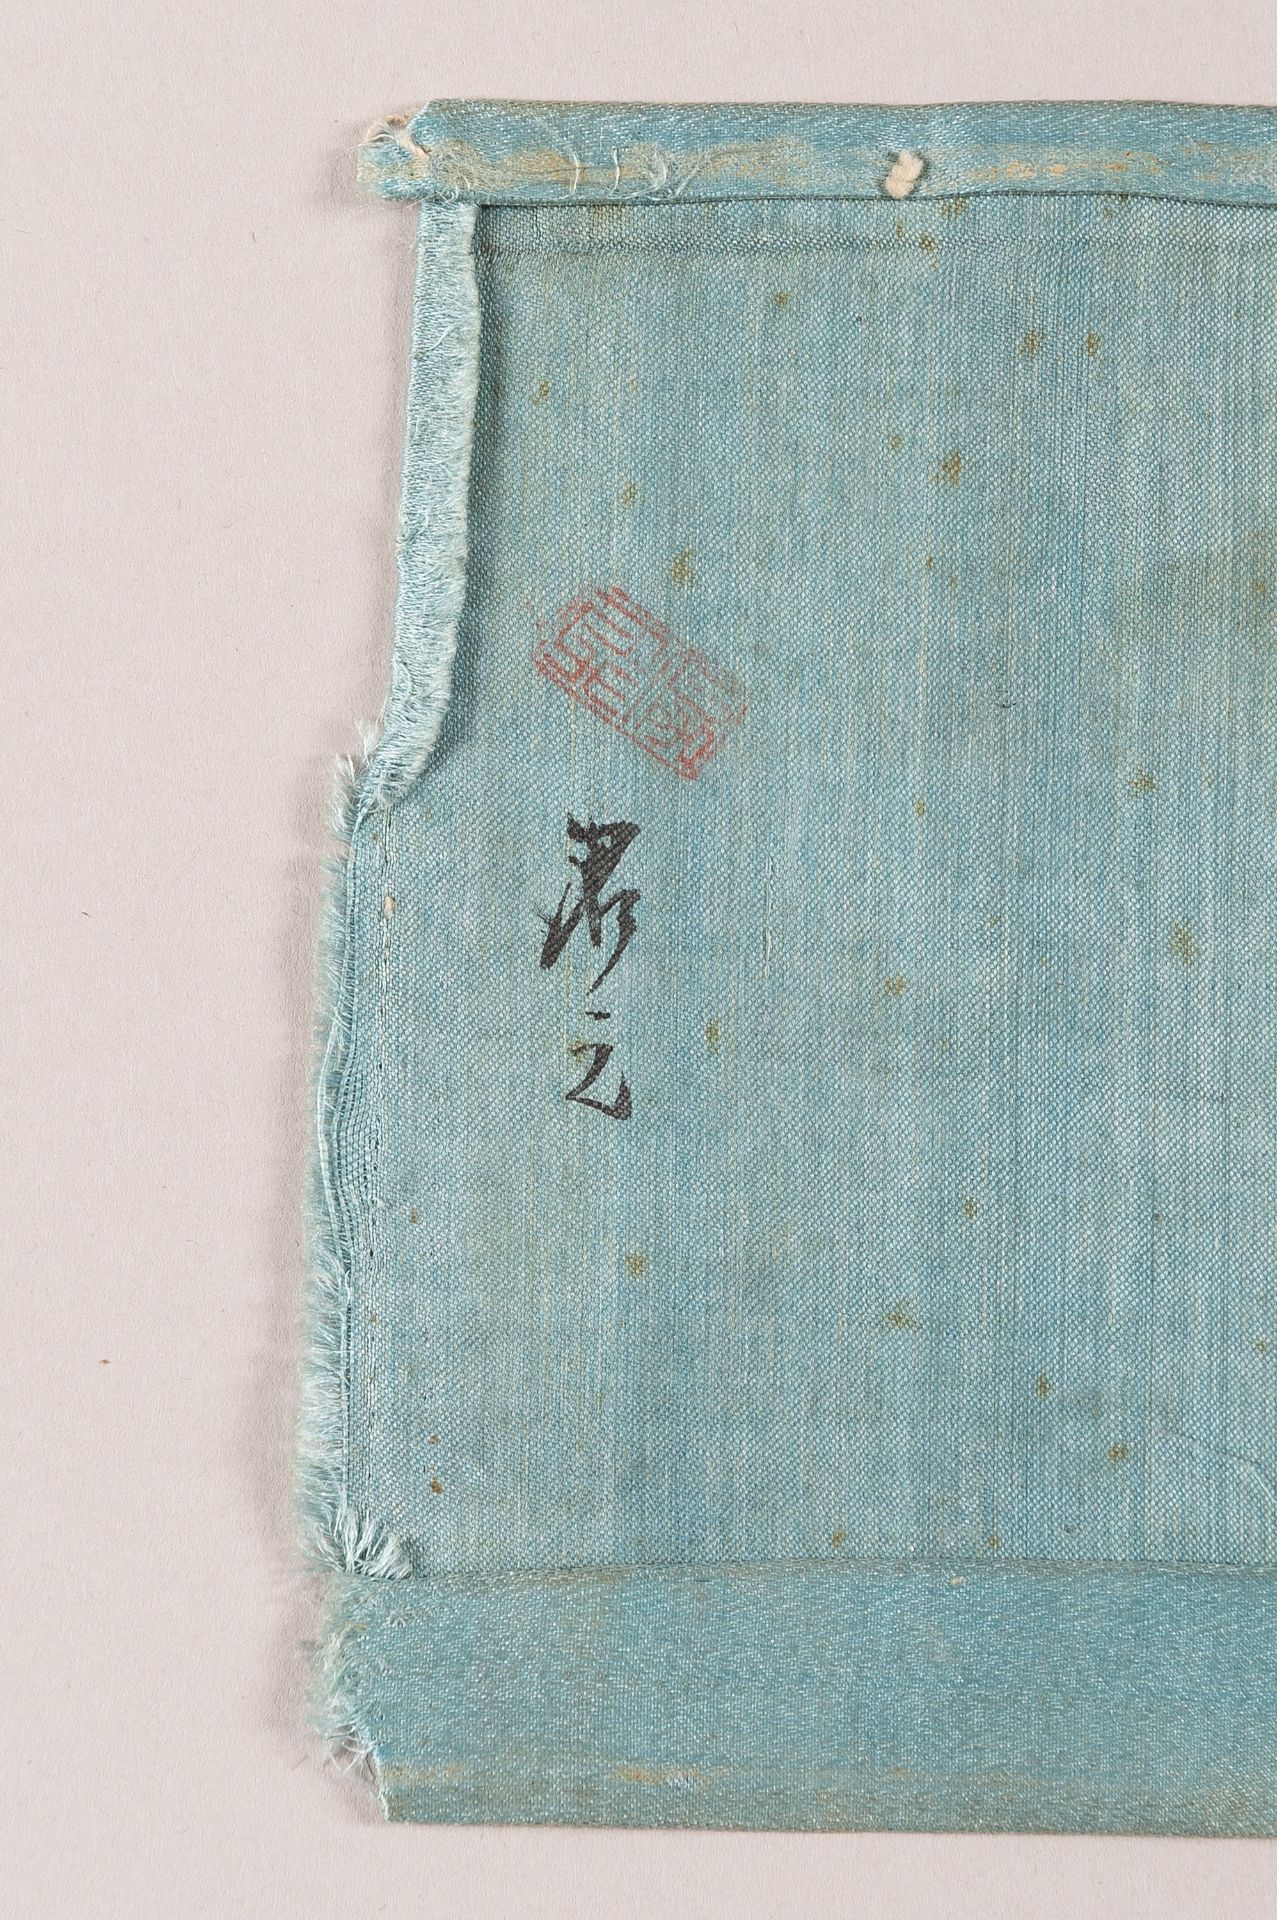 A PAIR OF 'EIGHT HORSES OF MUWANG' SILK SLEEVE BANDS, LATE QING DYNASTY - Image 7 of 8